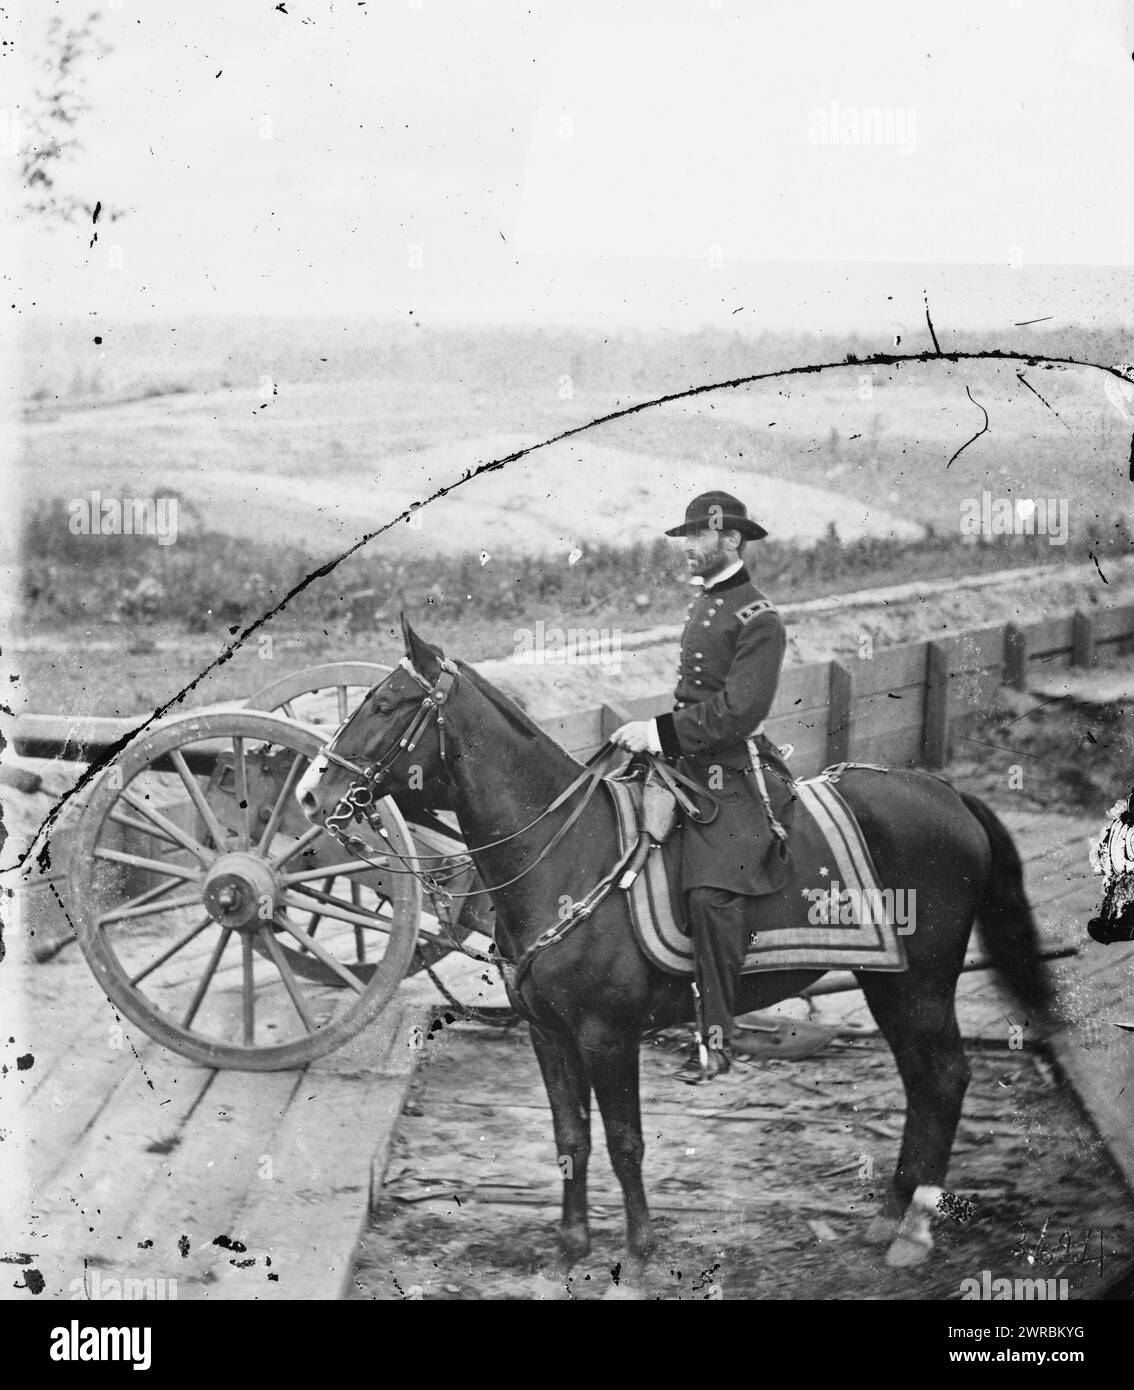 Atlanta, Ga. Gen. William T. Sherman on horseback at Federal Fort No. 7, Photograph of the War in the West. These photographs are of Sherman in Atlanta, September-November, 1864. After three and a half months of incessant maneuvering and much hard fighting, Sherman forced Hood to abandon the munitions center of the Confederacy. Sherman remained there, resting his war-worn men and accumulating supplies, for nearly two and a half months. During the occupation, George N. Barnard, official photographer of the Chief Engineer's Office Stock Photo